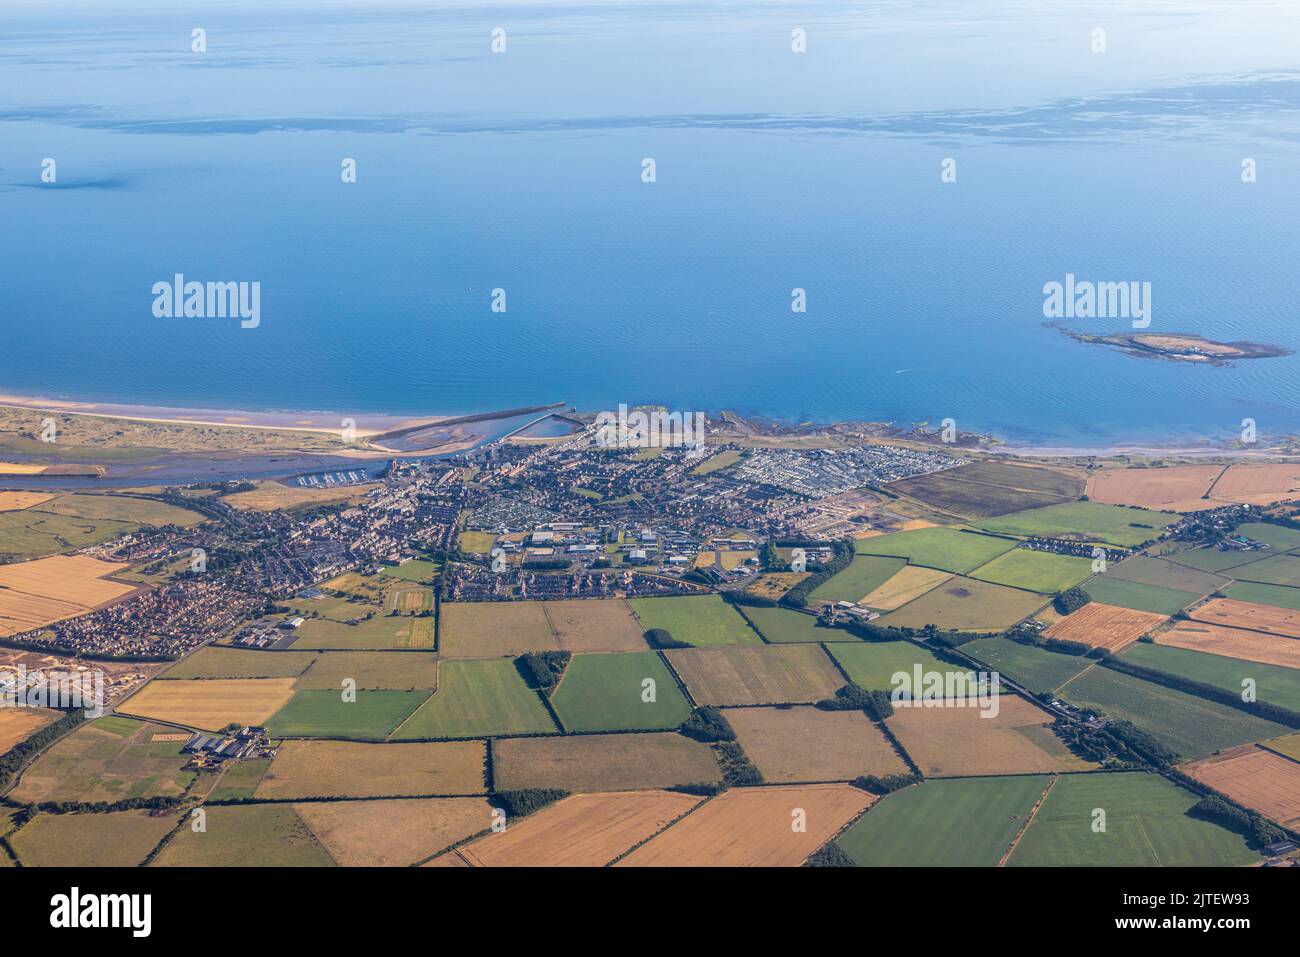 Aerial photograph of the coastal town of Amble and the Coquet Island, located on the Northumberland coast line, 25 miles north of Newcastle upon Tyne. Stock Photo